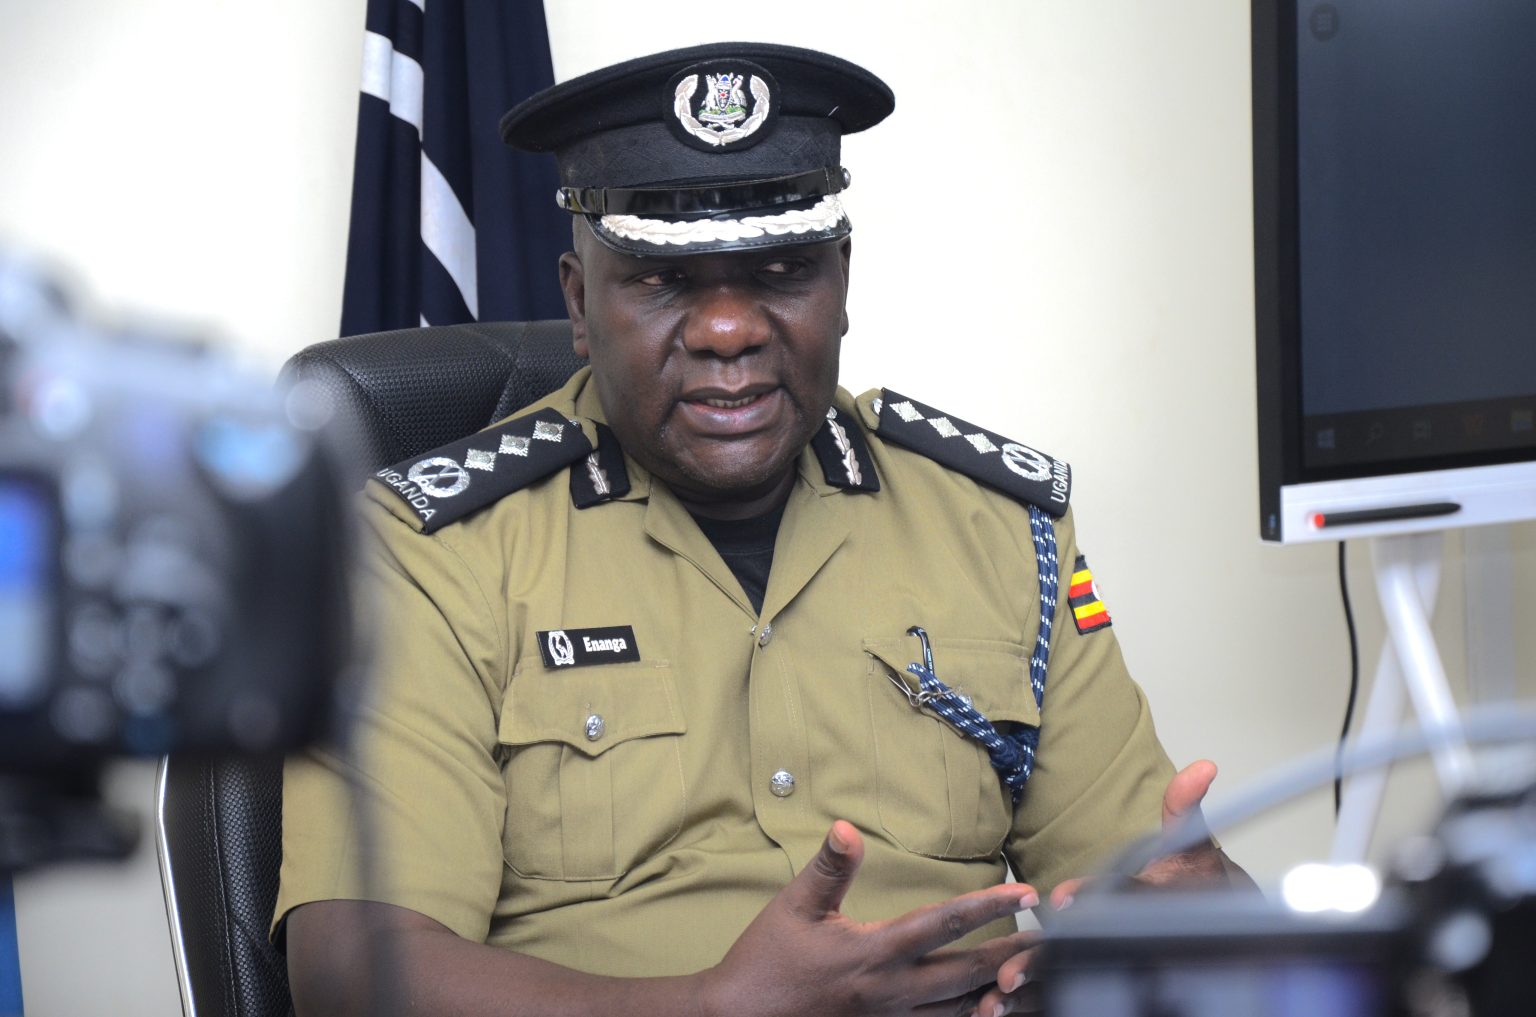 Police Demands Withdrawal of Advert Featuring Traffic Officer Image